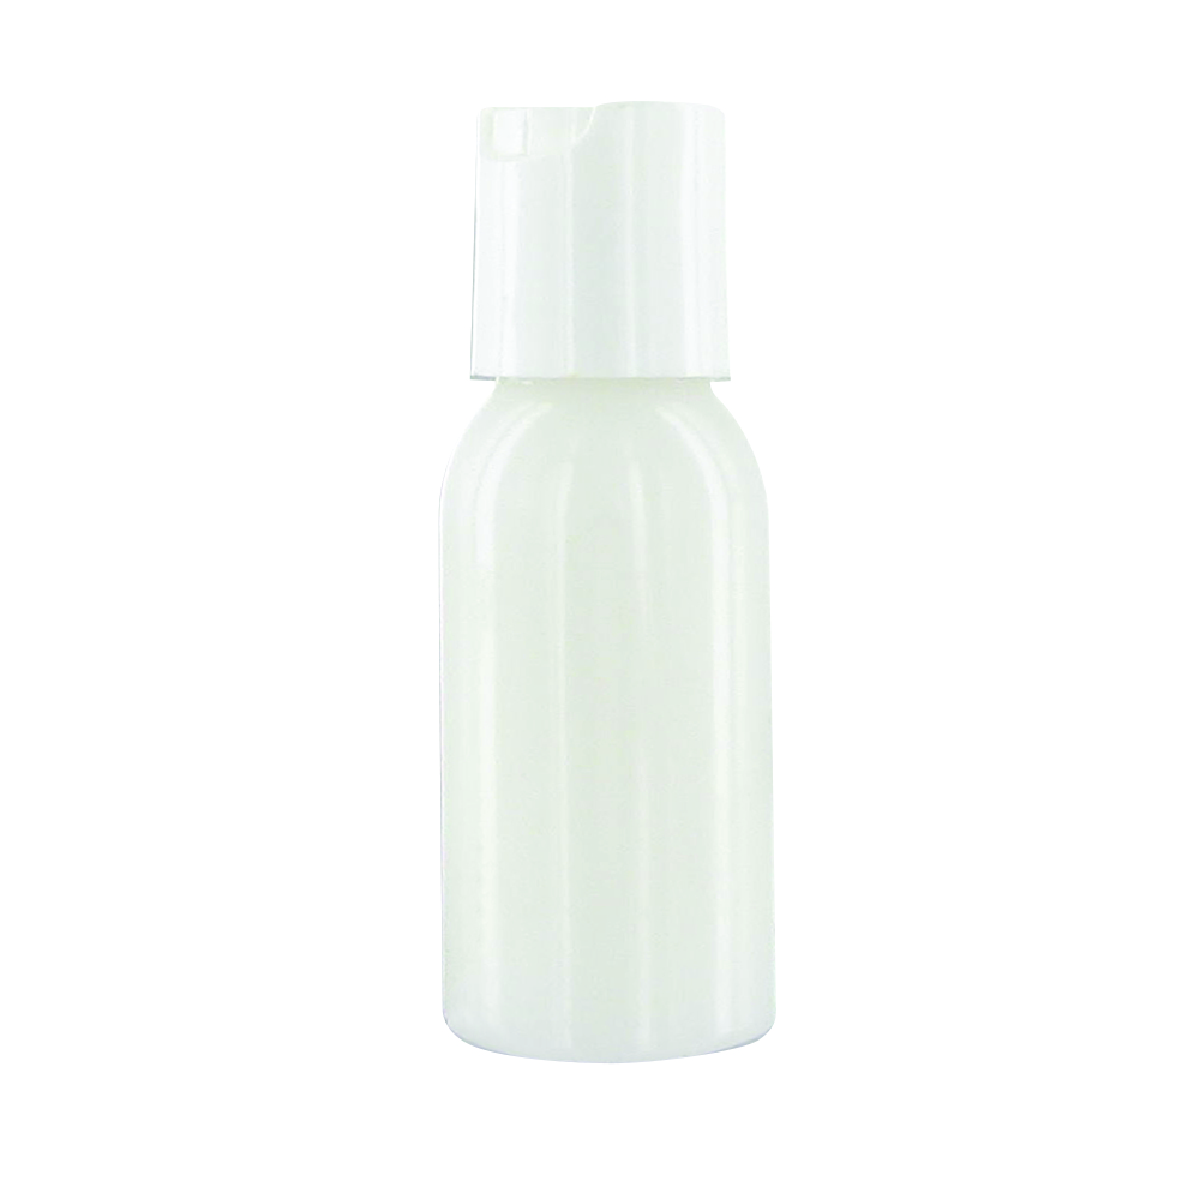 Unscented Lotion in Clear Round Bottle 1 oz